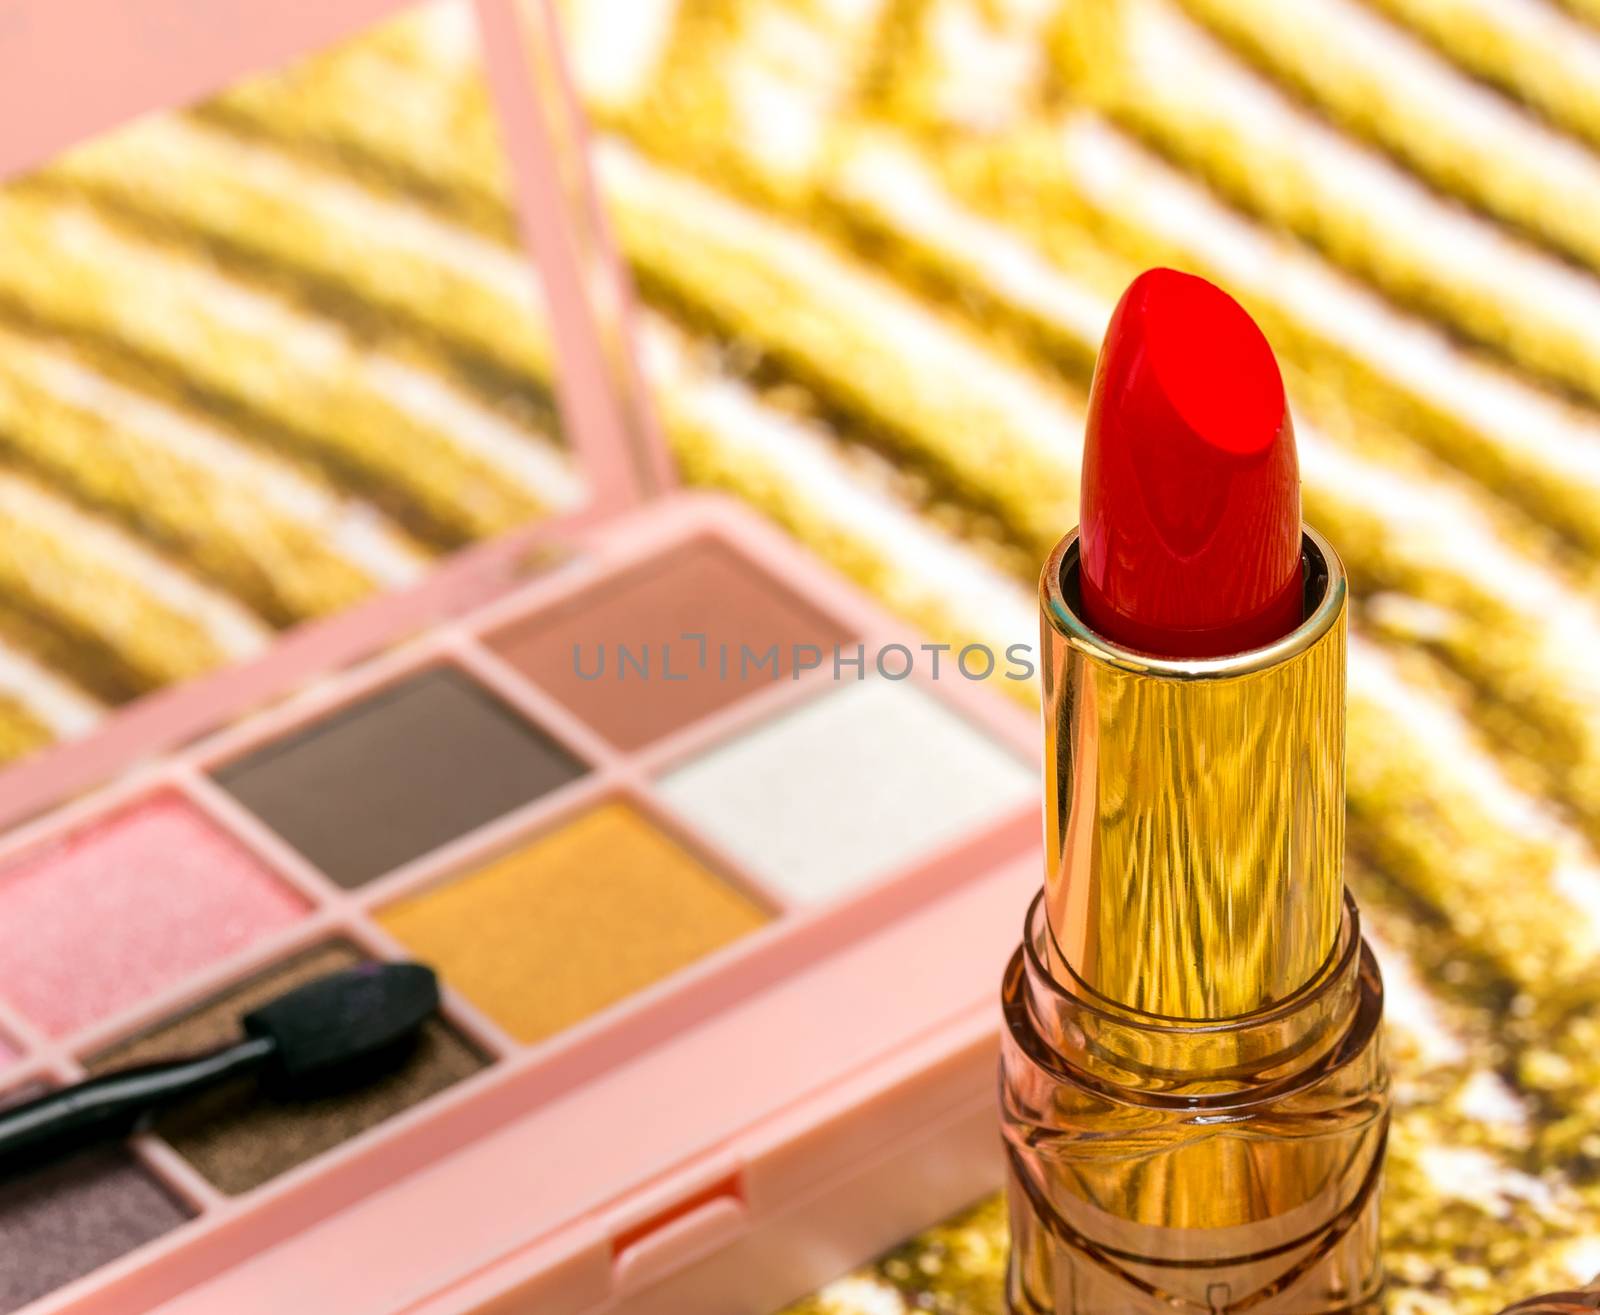 Red Lipstick Makeup Shows Beauty Products And Cosmetics  by stuartmiles